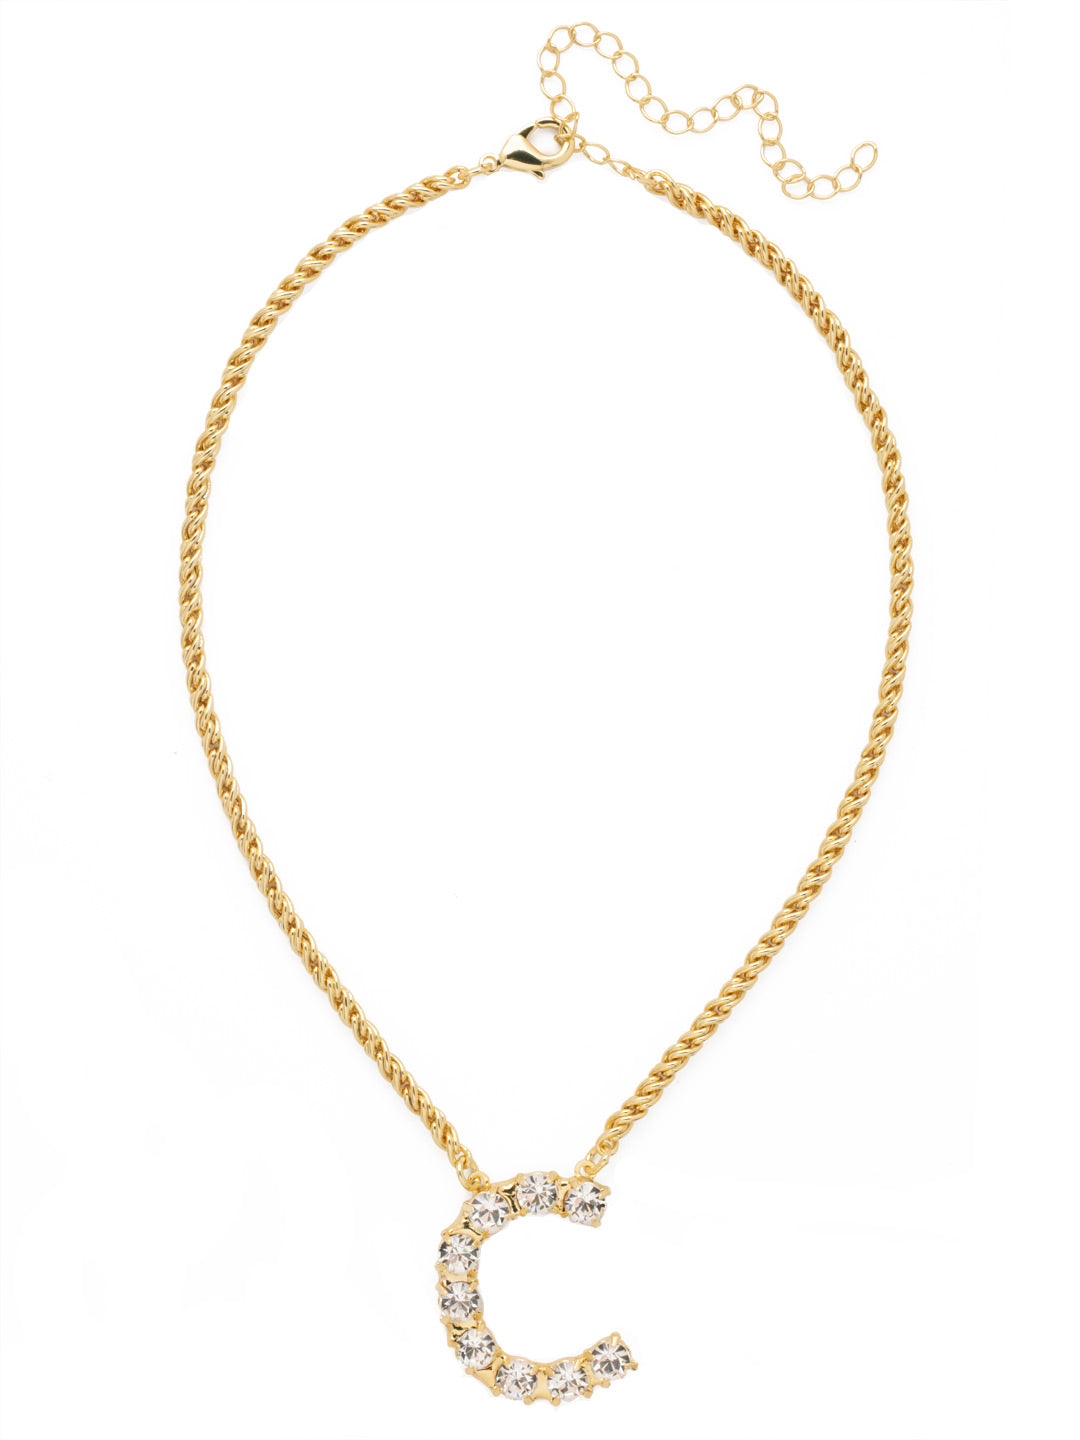 C Initial Rope Pendant Necklace - NFK22BGCRY - <p>The Initial Rope Pendant Necklace features a crystal encrusted metal monogram pendant on an adjustable rope chain, secured with a lobster claw clasp. From Sorrelli's Crystal collection in our Bright Gold-tone finish.</p>